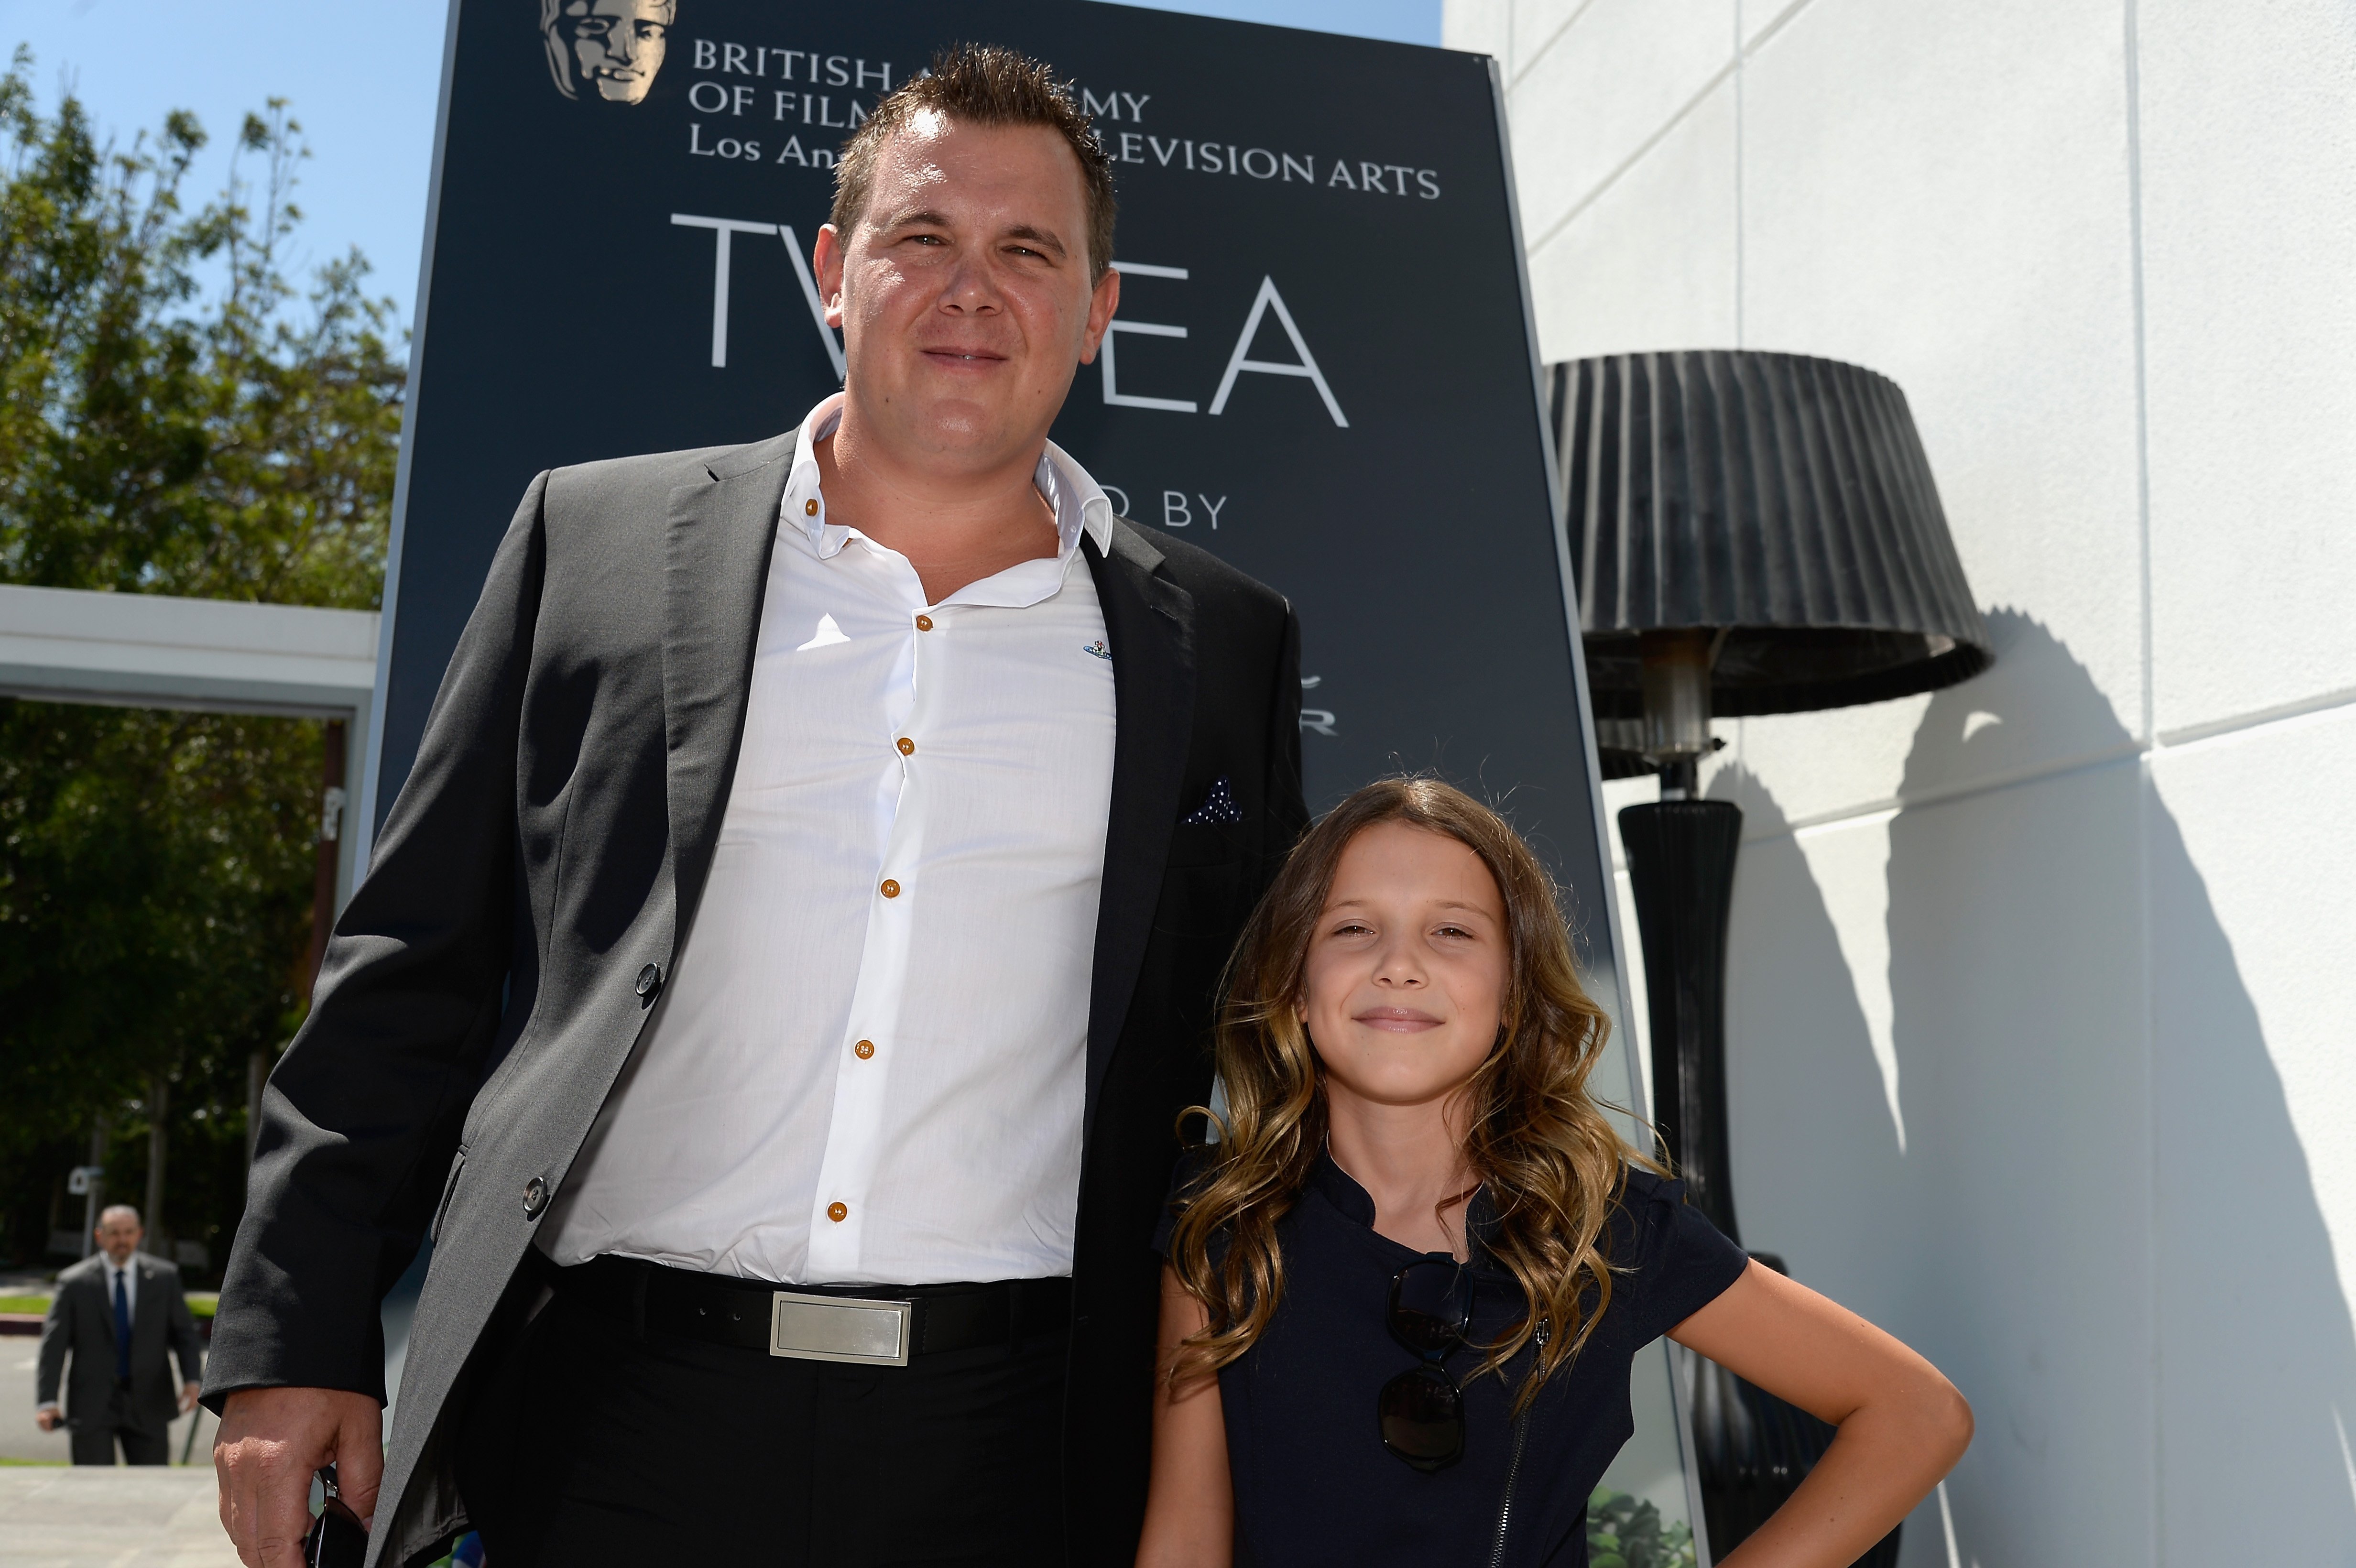 Robert Brown (L) and actress Millie Brown attend the 2014 BAFTA Los Angeles TV Tea at SLS Hotel, on August 23, 2014, in Beverly Hills, California. | Source: Getty Images